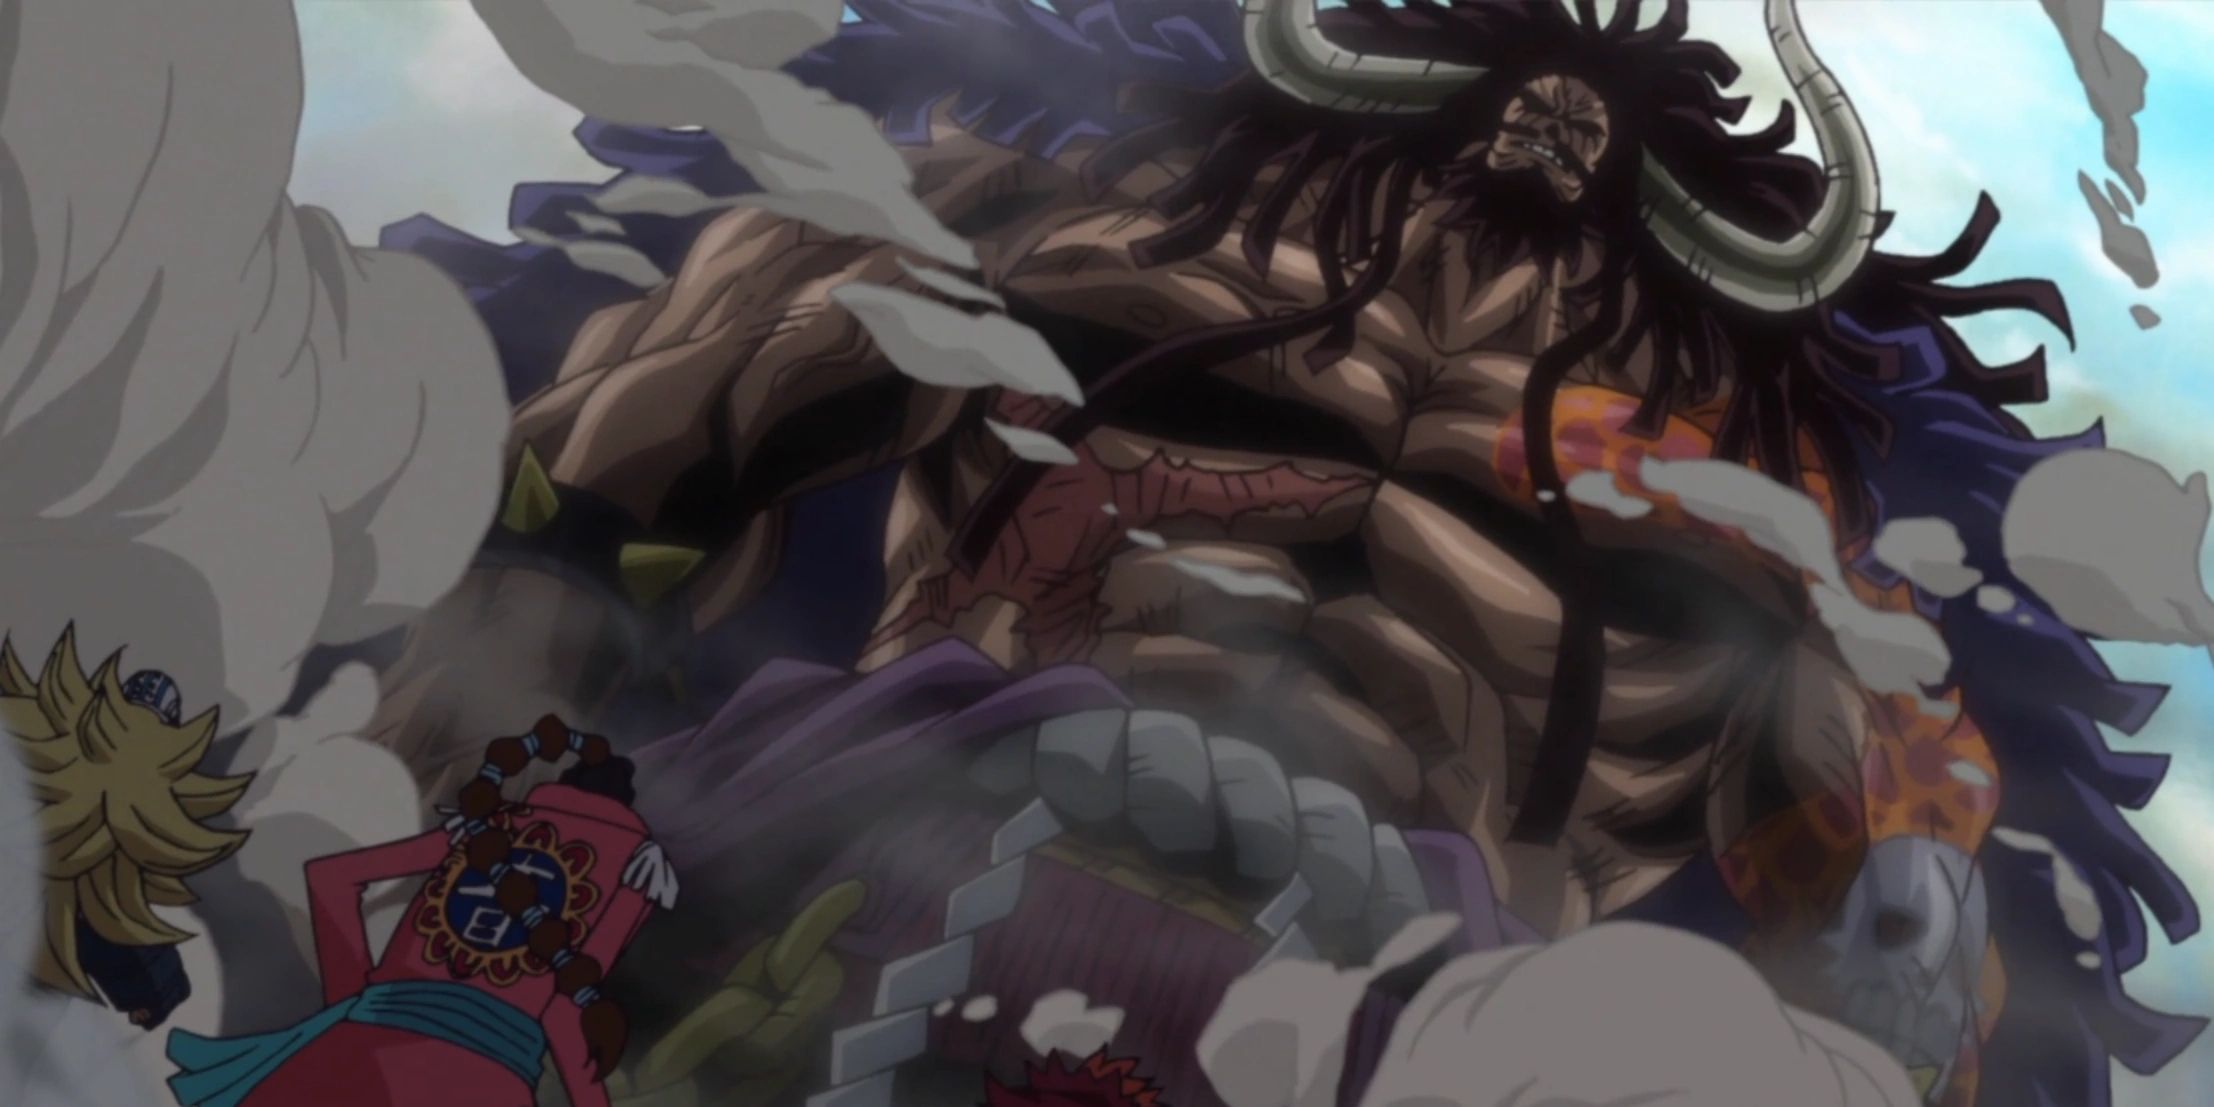 Kaido with scars on his torso in One Piece.